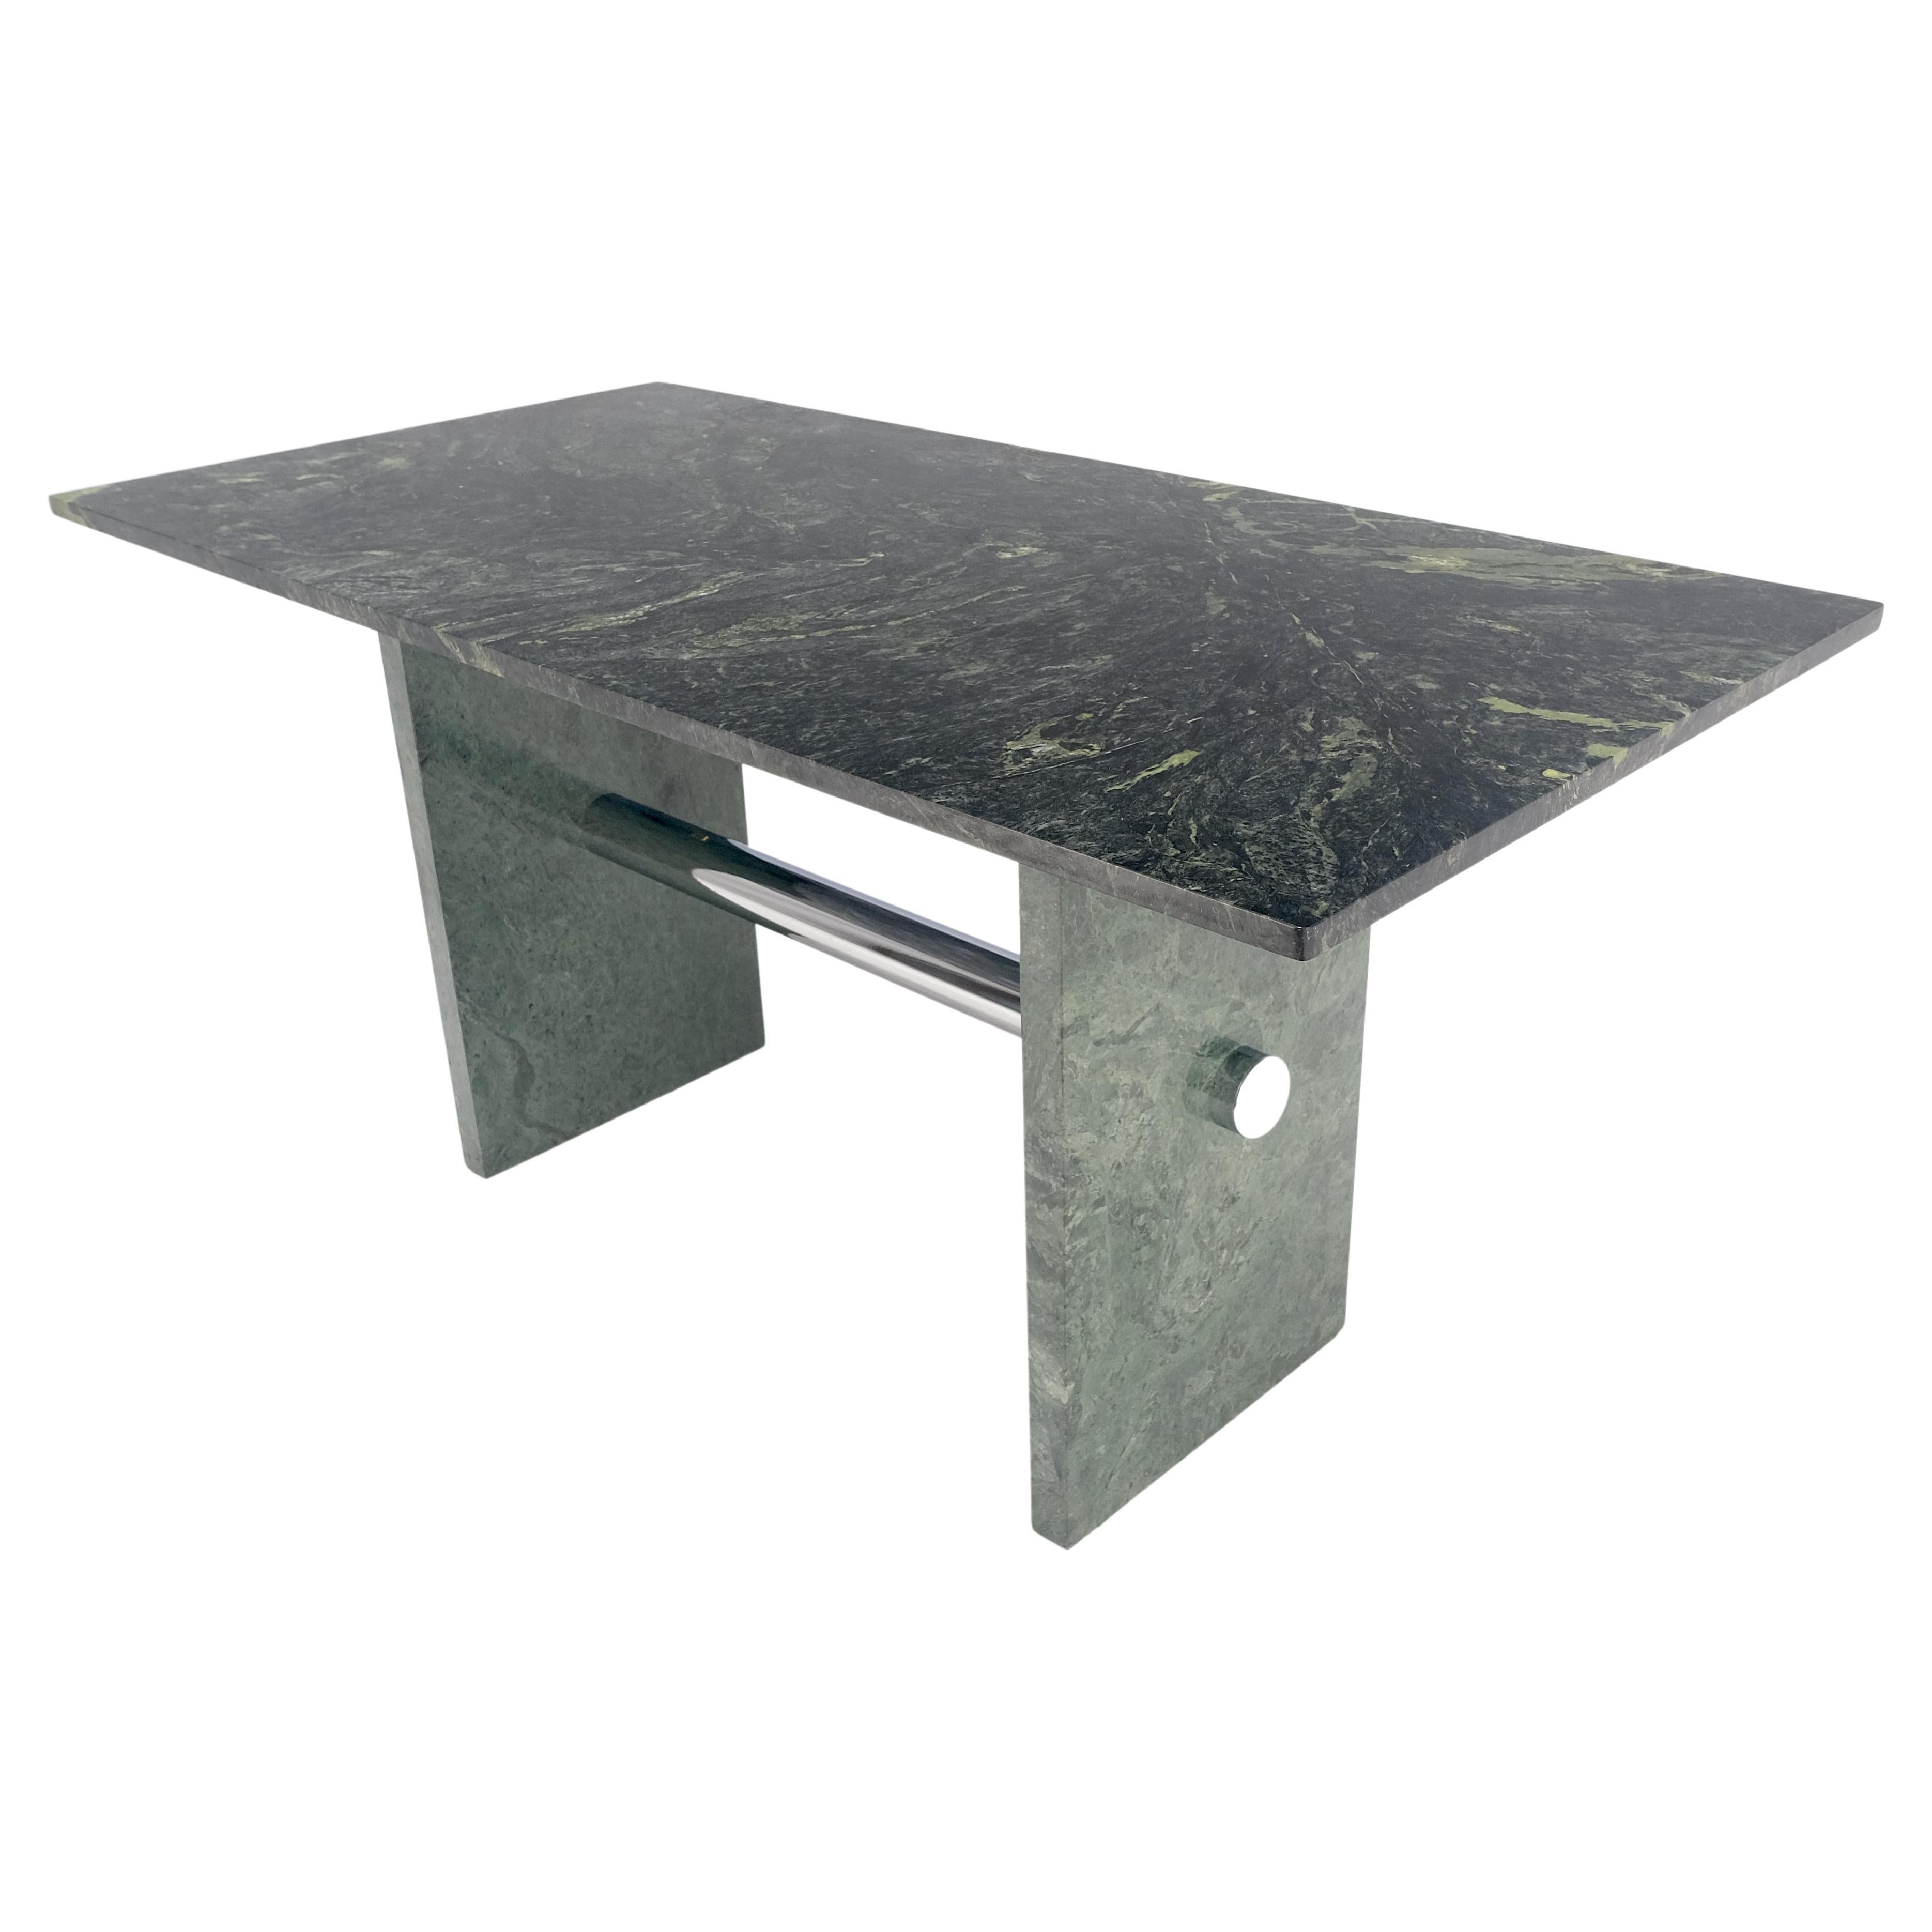 Green Rectangle Marble Top Cylinder Crome Stretcher Base Dining Table Desk MINT!